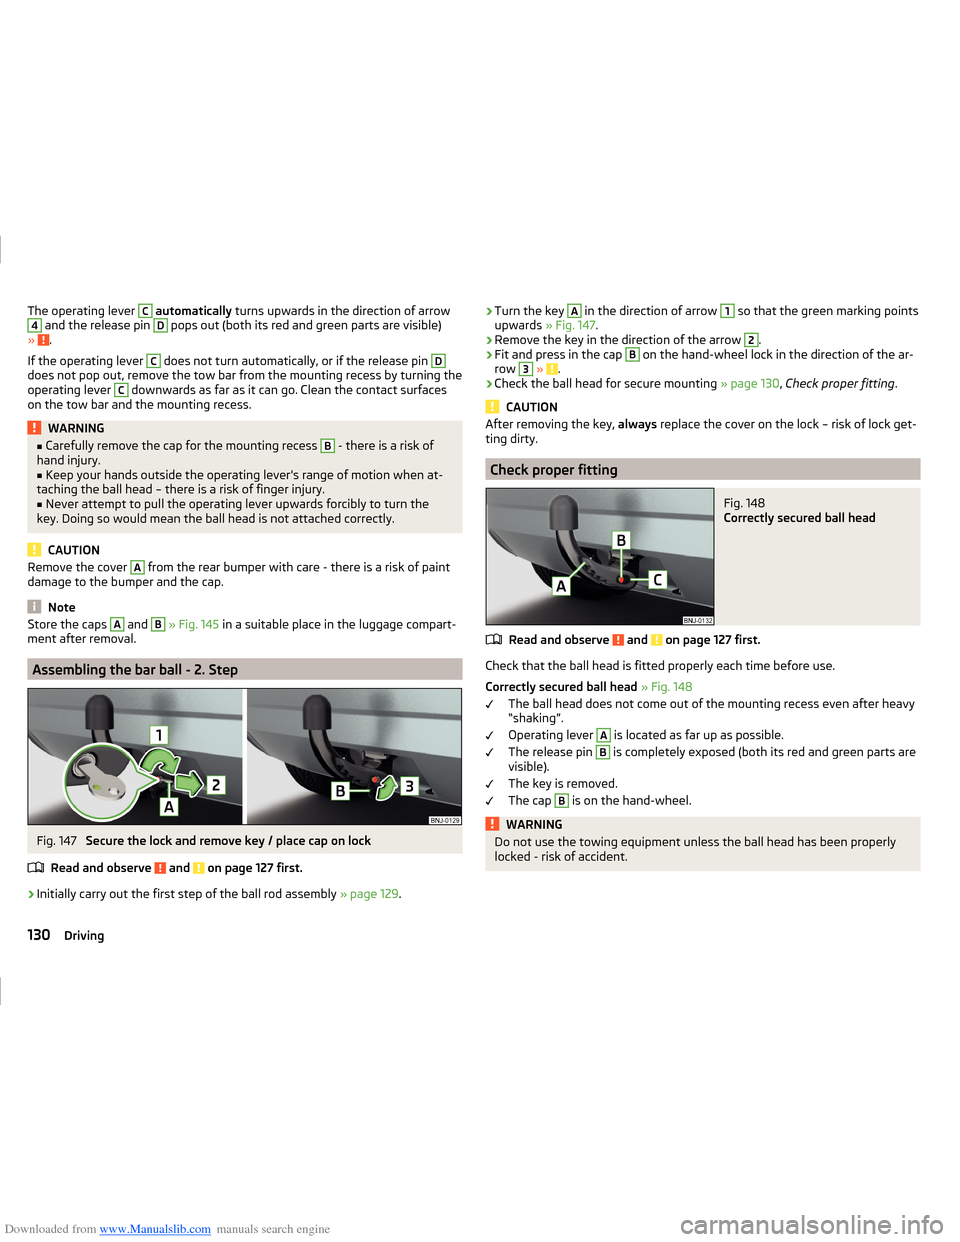 SKODA FABIA 2014 3.G / NJ Operating Instruction Manual Downloaded from www.Manualslib.com manuals search engine The operating lever C automatically  turns upwards in the direction of arrow4 and the release pin D pops out (both its red and green parts are 